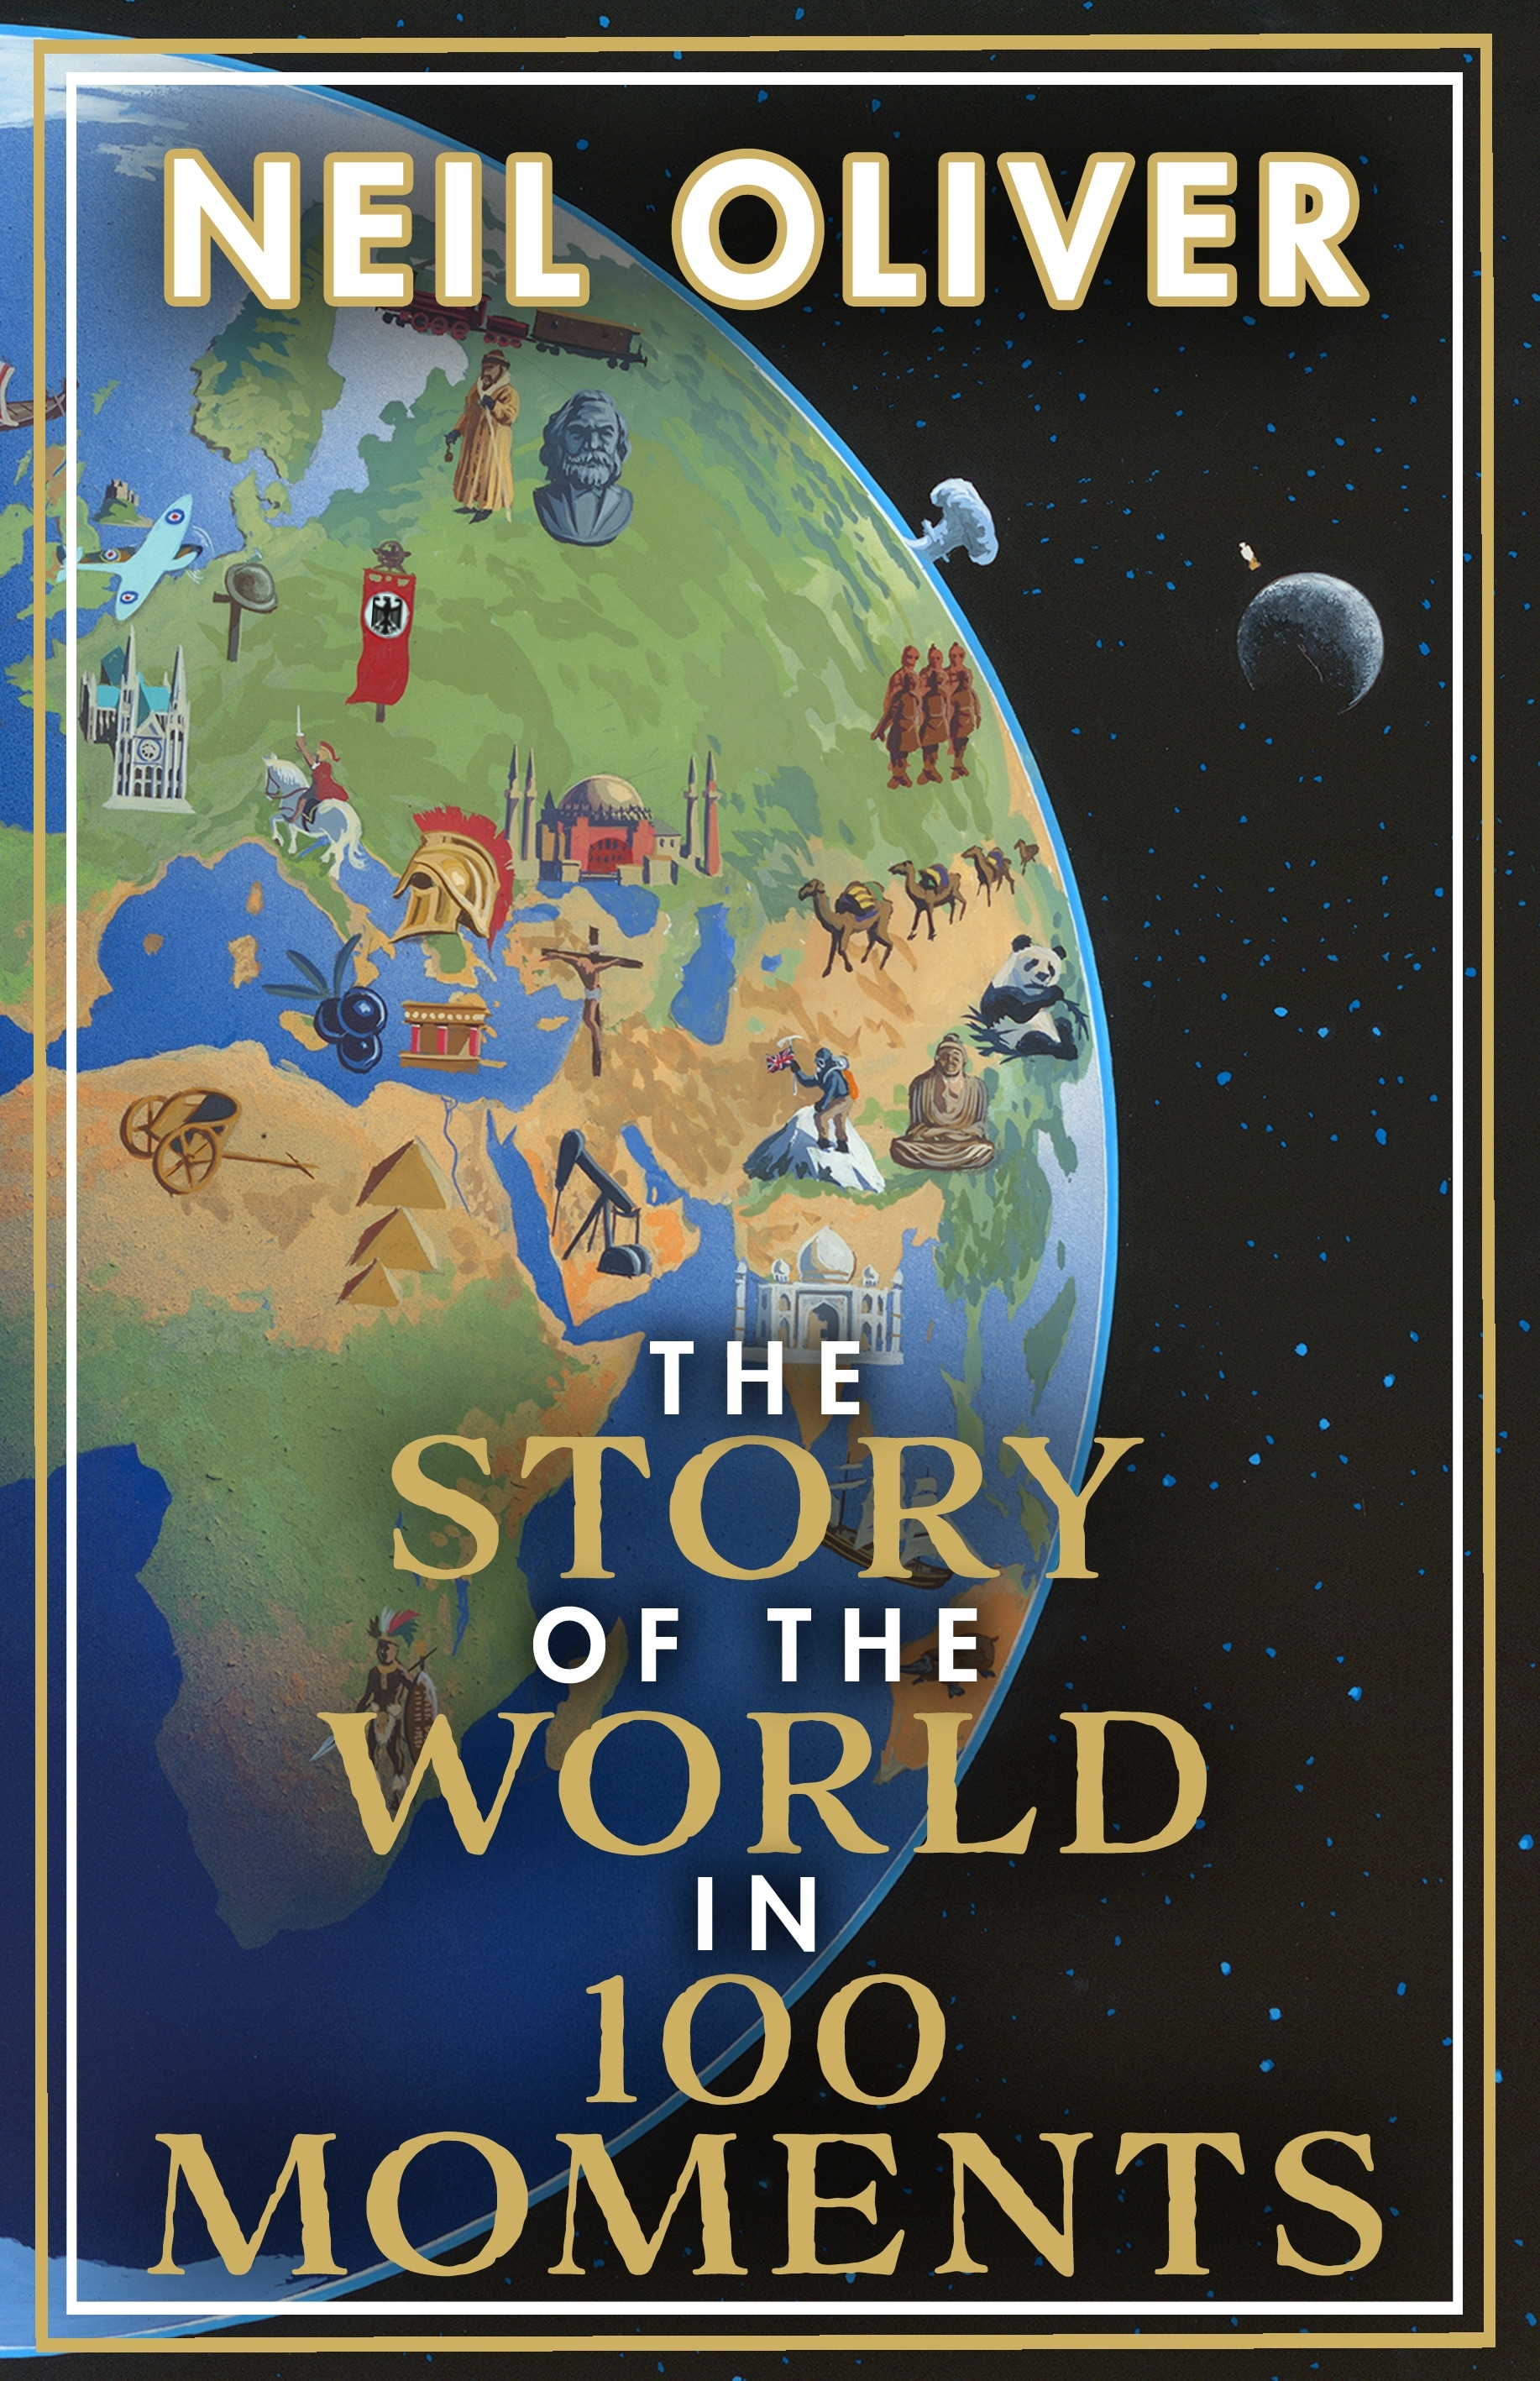 Book “The Story of the World in 100 Moments” by Neil Oliver — September 16, 2021